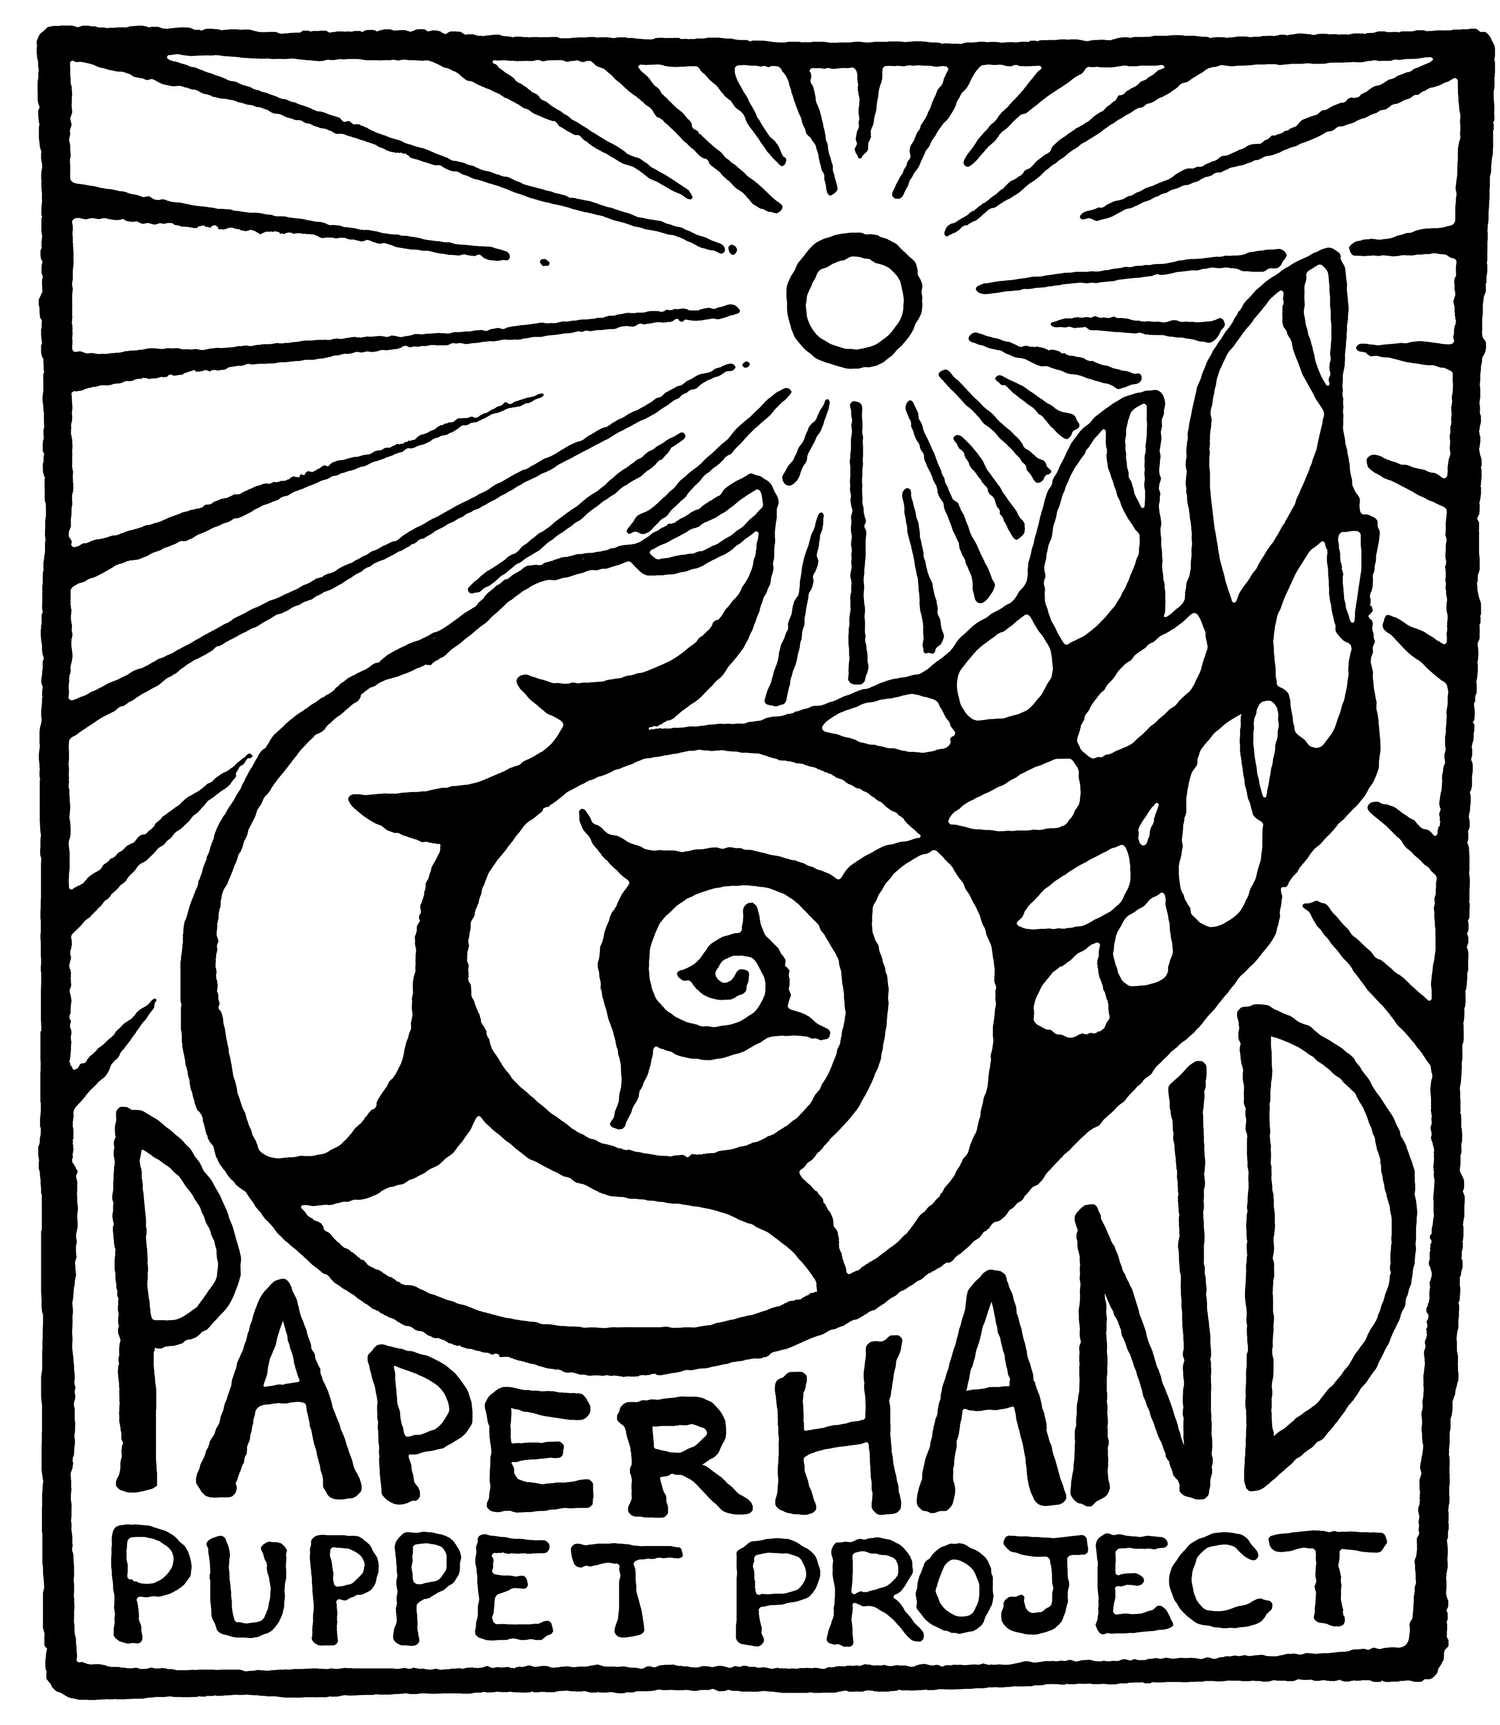 Paperhand Puppet Project